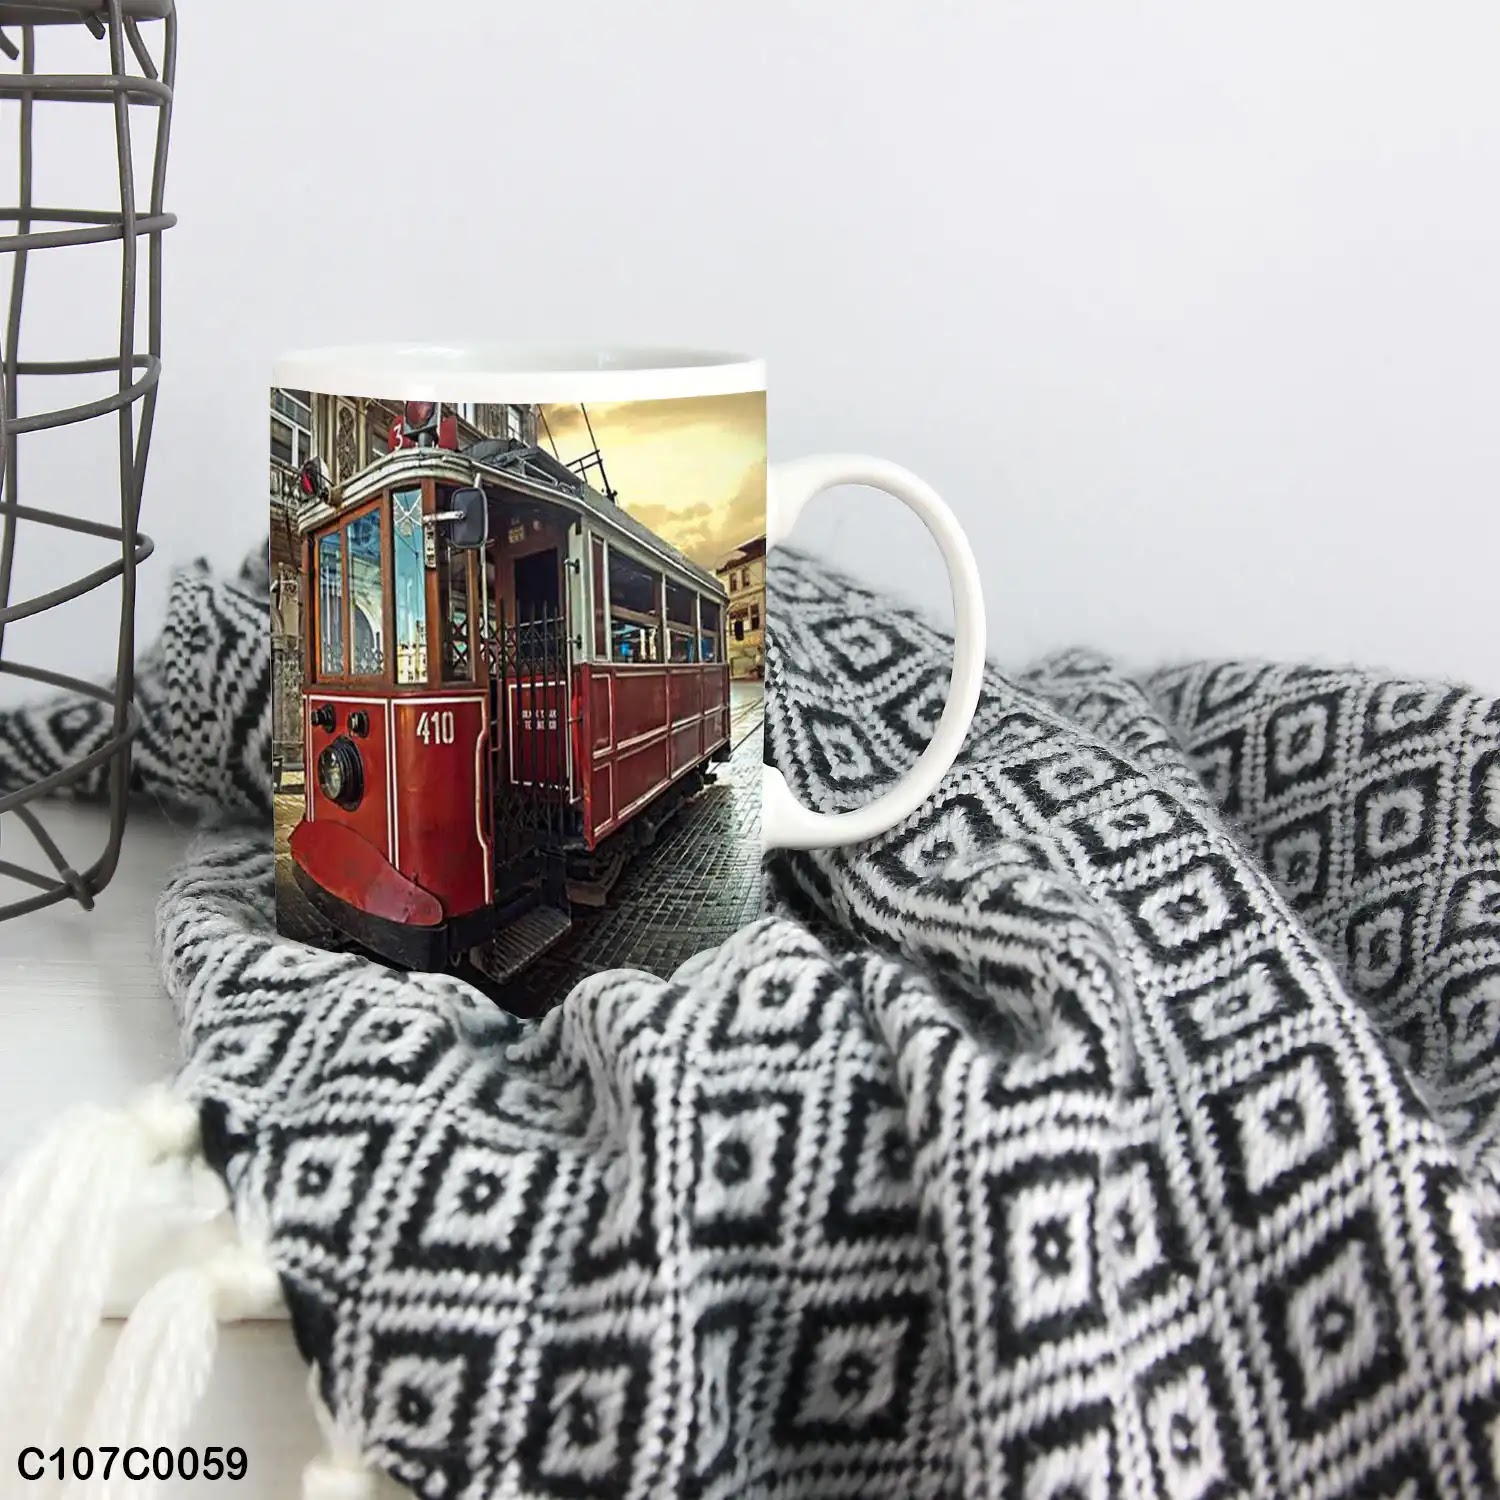 A mug (cup) printed with an image of Istanbul train